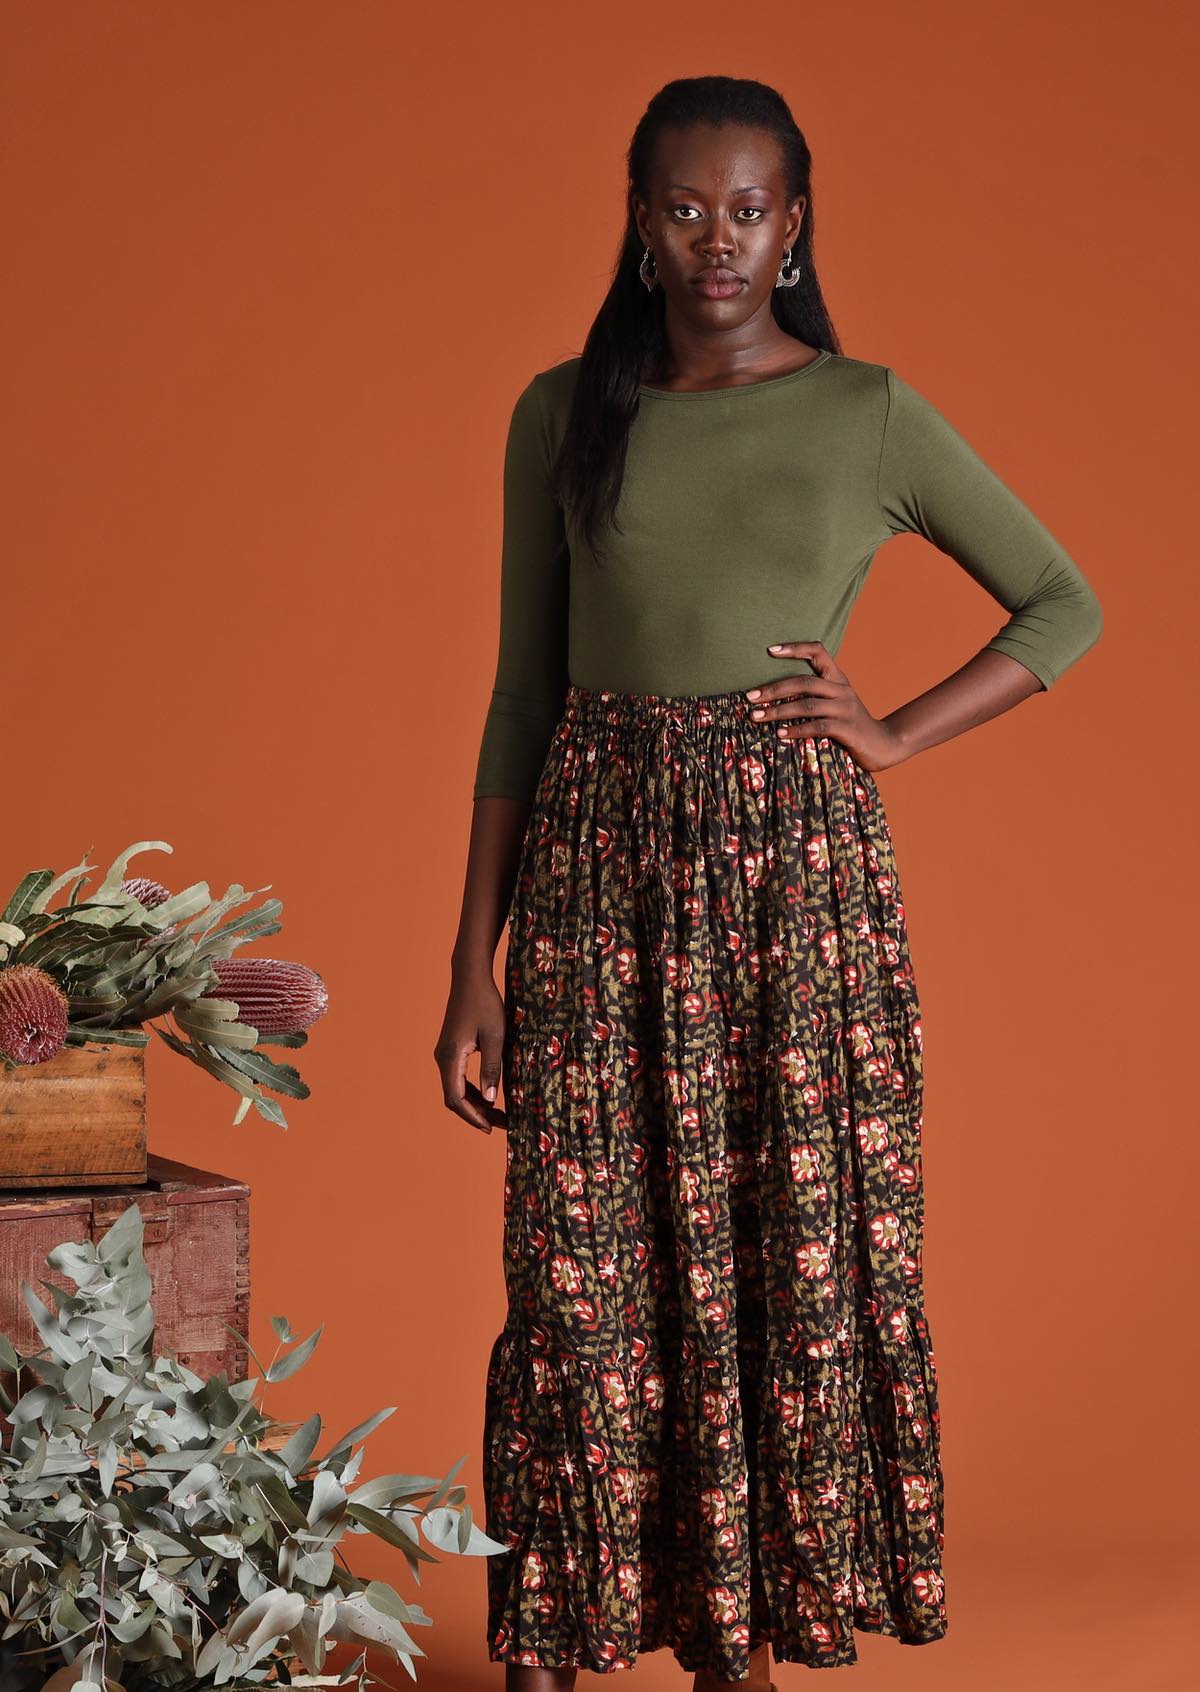 Maxi Skirt Wild Rose elasticated waistband three tier fabric extra volume full length 100% cotton black, green and red floral print | Karma East Australia